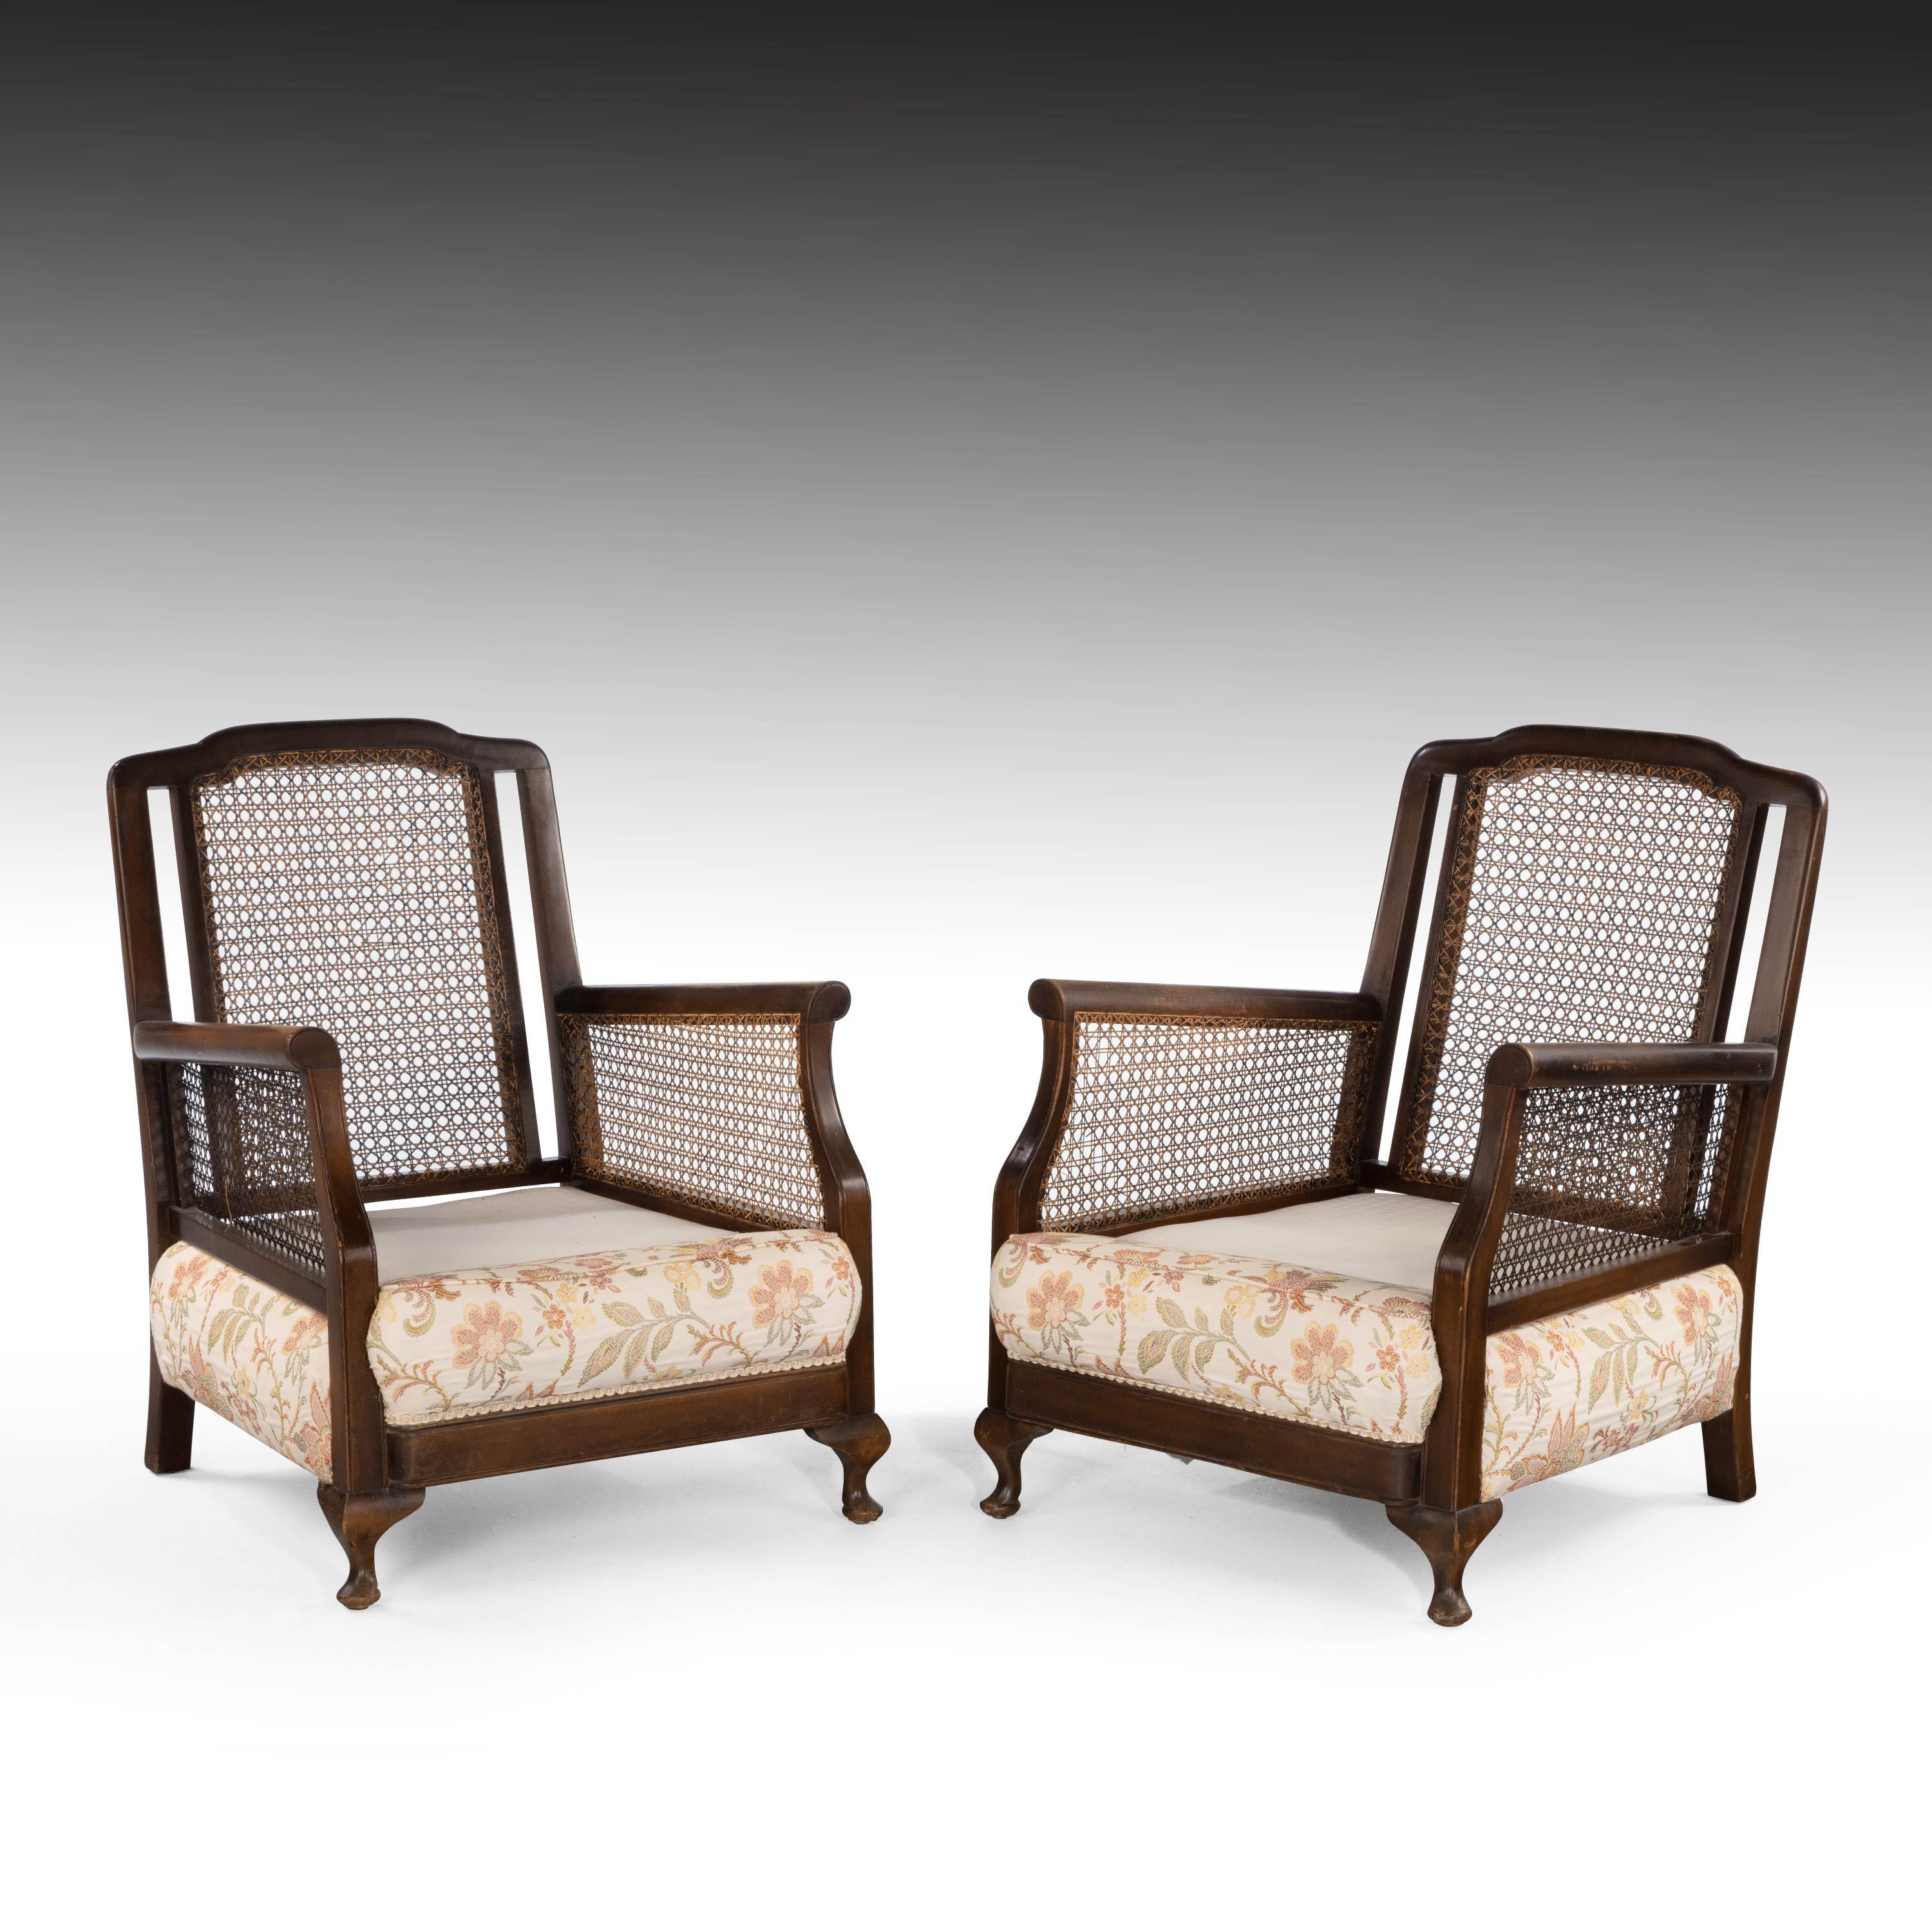 Attractive Late 20th Century Pair of Mahogany and Canework Chairs 1